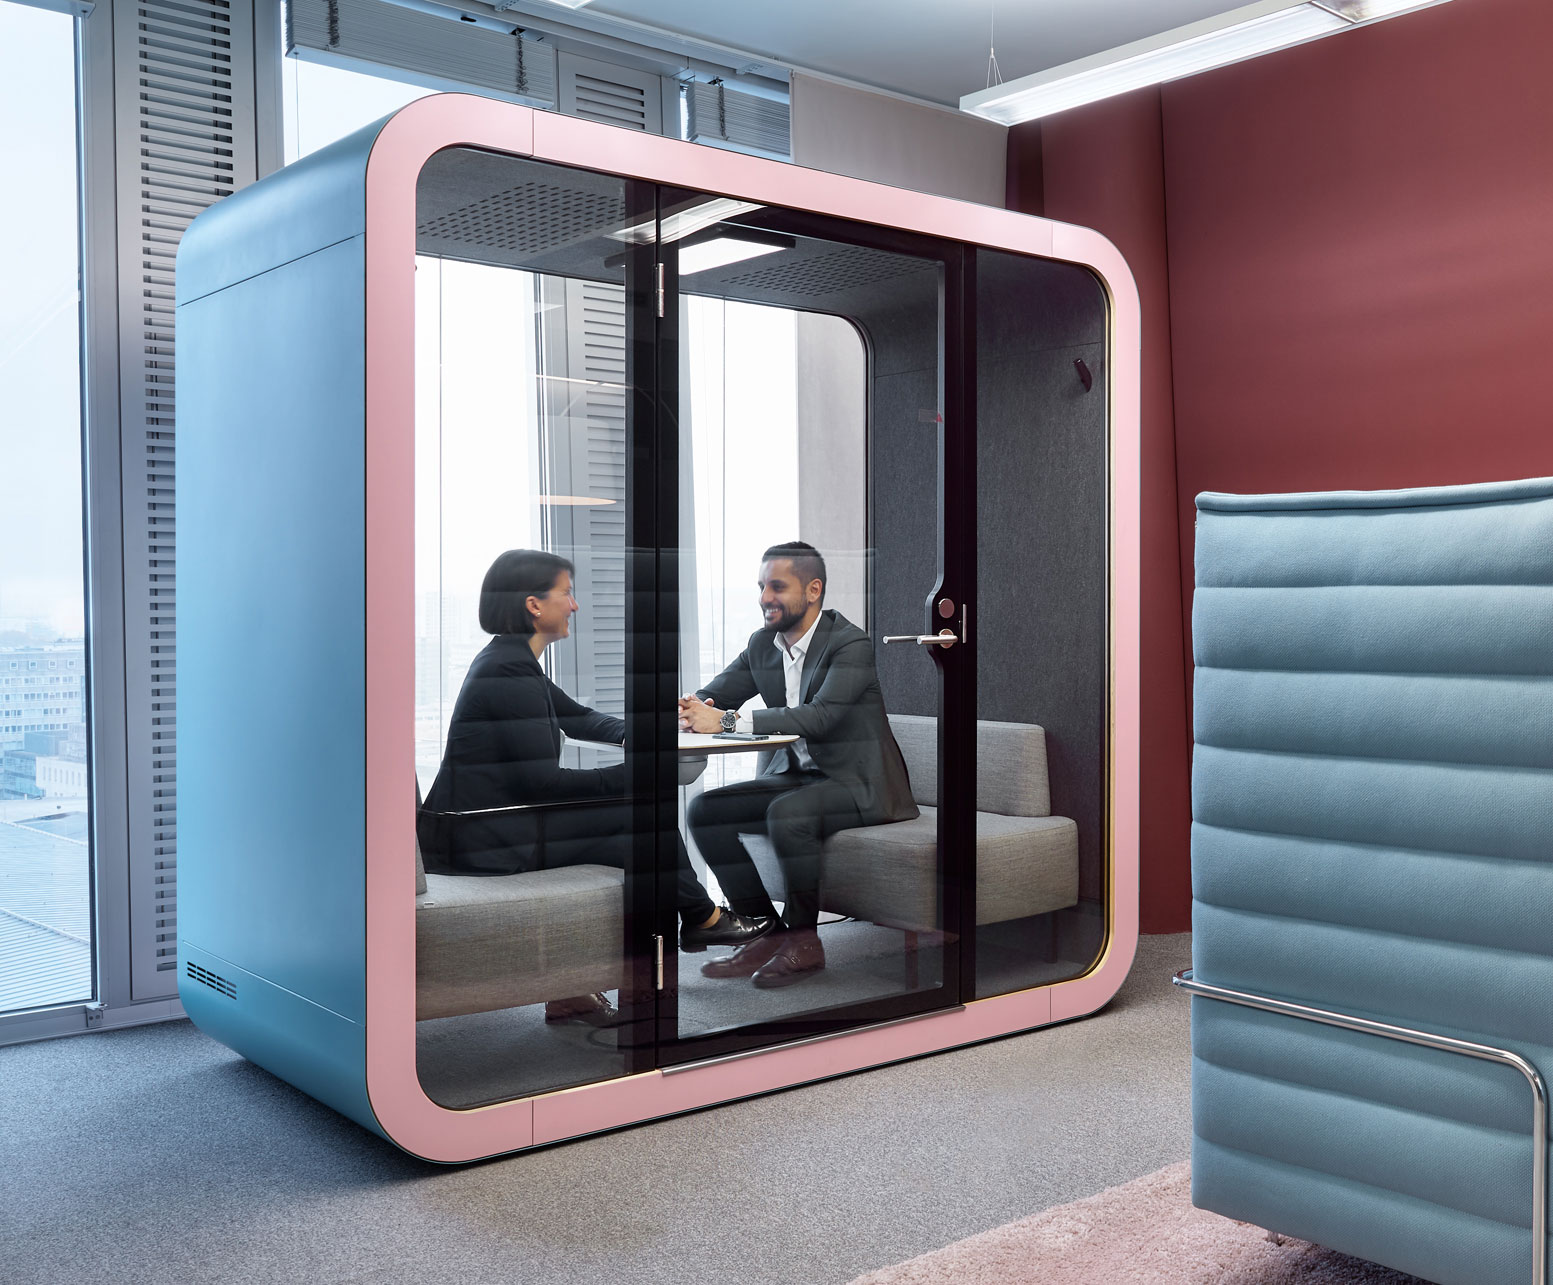 A modern pastel blue privacy booth situated in a stylish office setting. Inside the booth, two professionals are engaged in a focused conversation, seated across a table from each other. The booth's transparent glass walls allow for a clear view of its interior, which is complemented by cushioned seating. Adjacent to the booth is a red wall and a blue padded partition, with large windows on the left offering a glimpse of the cityscape outside.